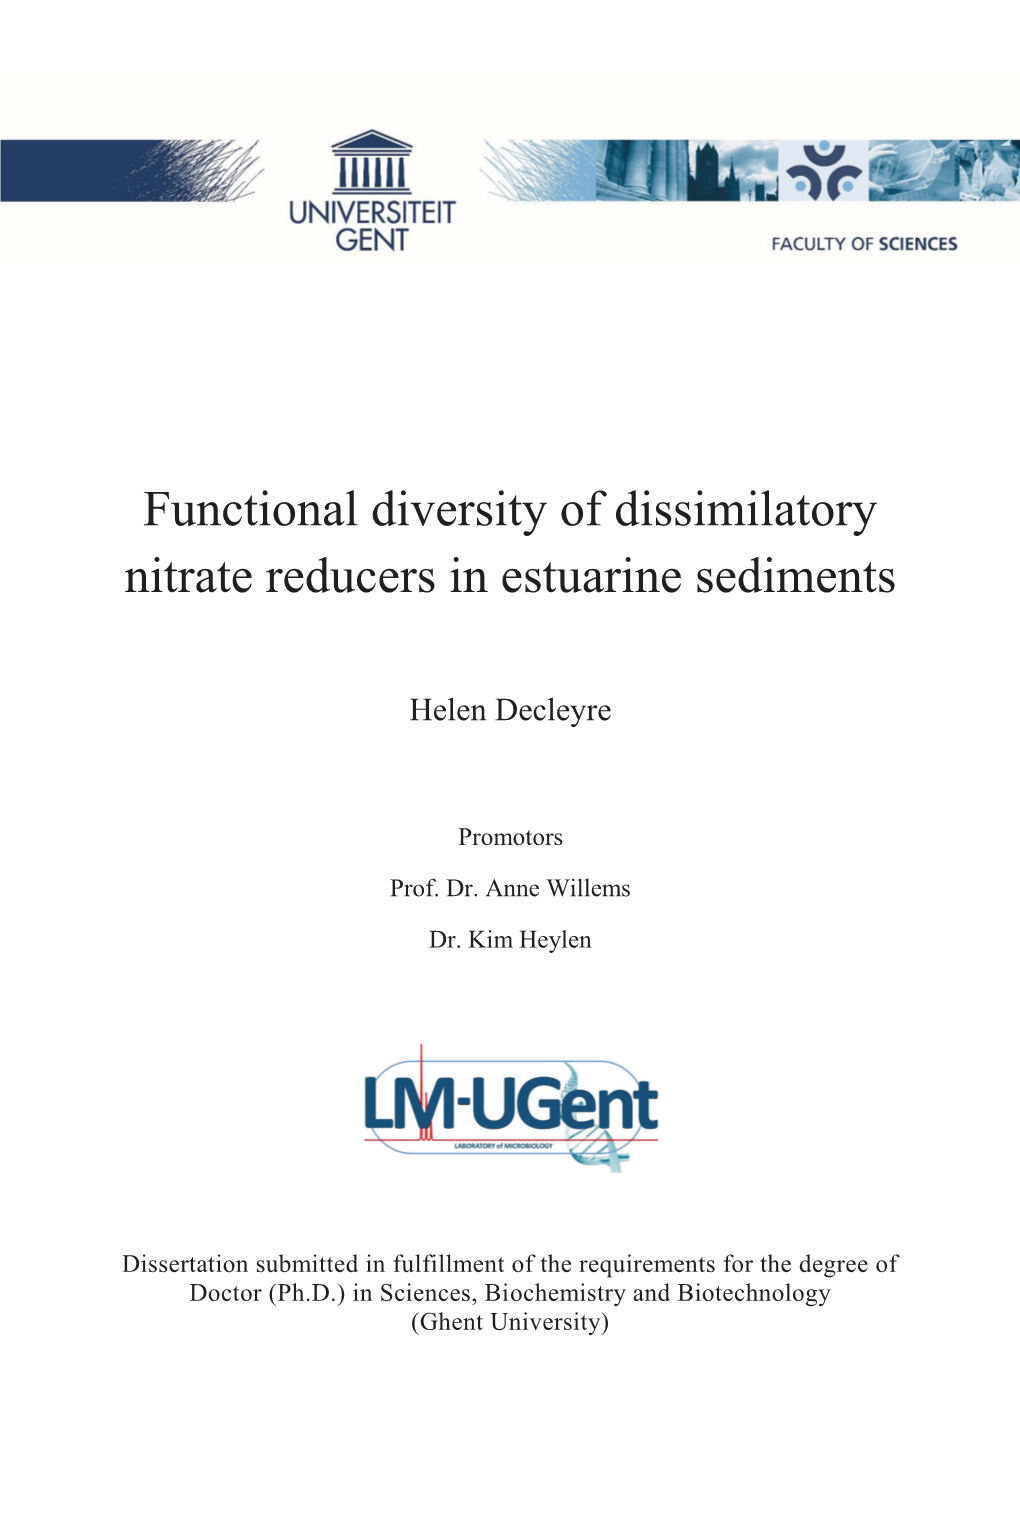 Functional Diversity of Dissimilatory Nitrate Reducers in Estuarine Sediments